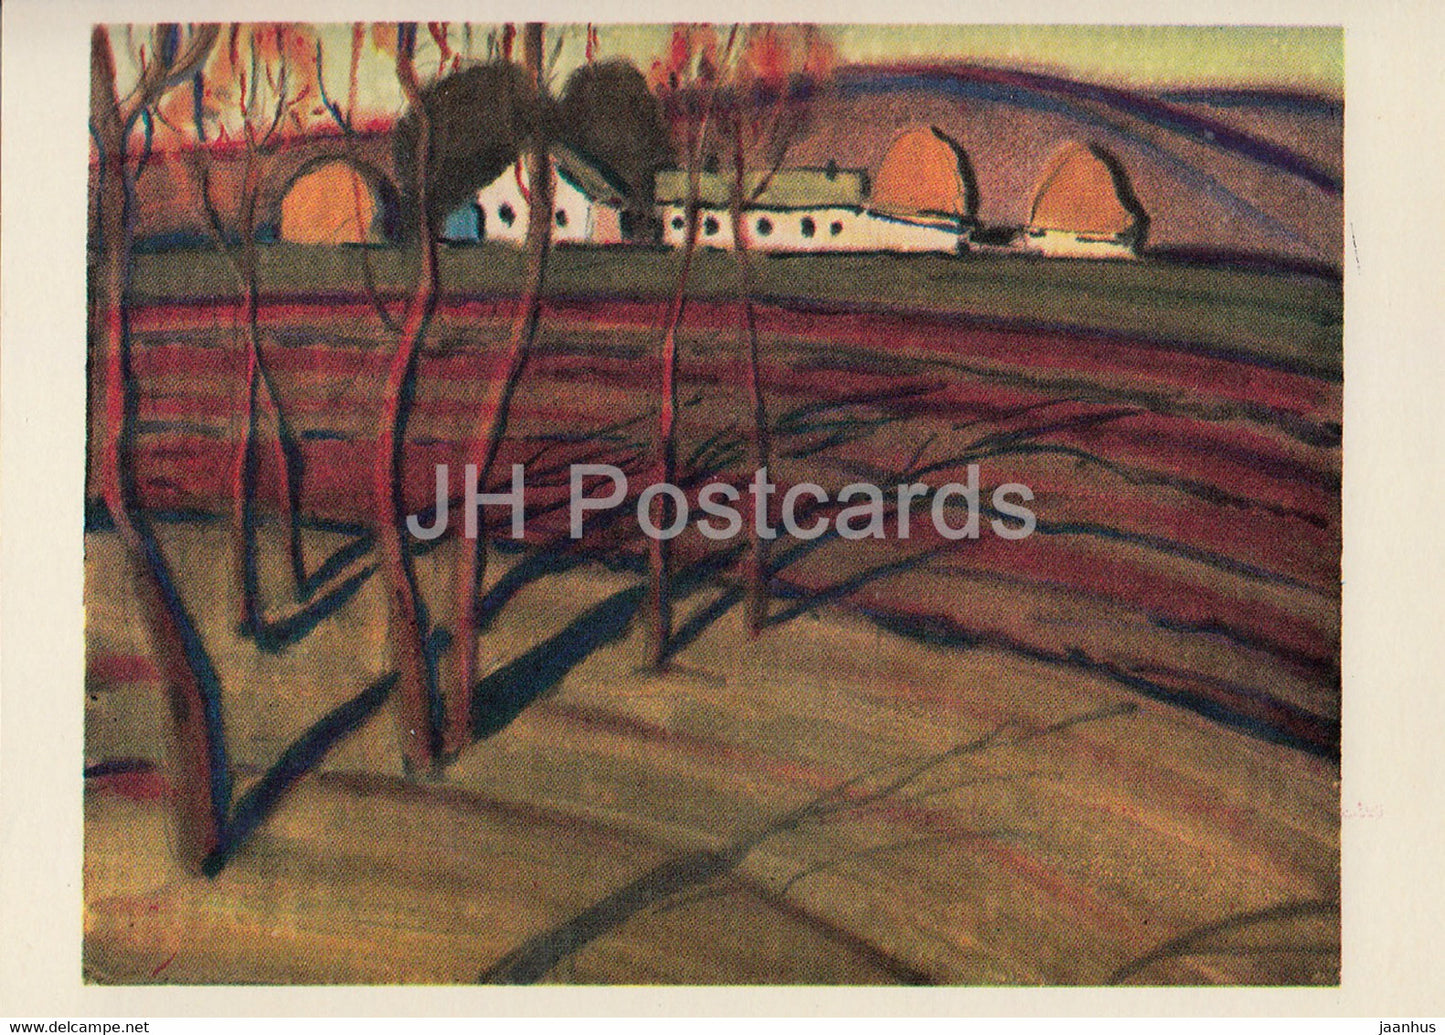 across Kyrgyzstan by V. Rogachev - Red Evening - illustration - 1979 - Russia USSR - unused - JH Postcards